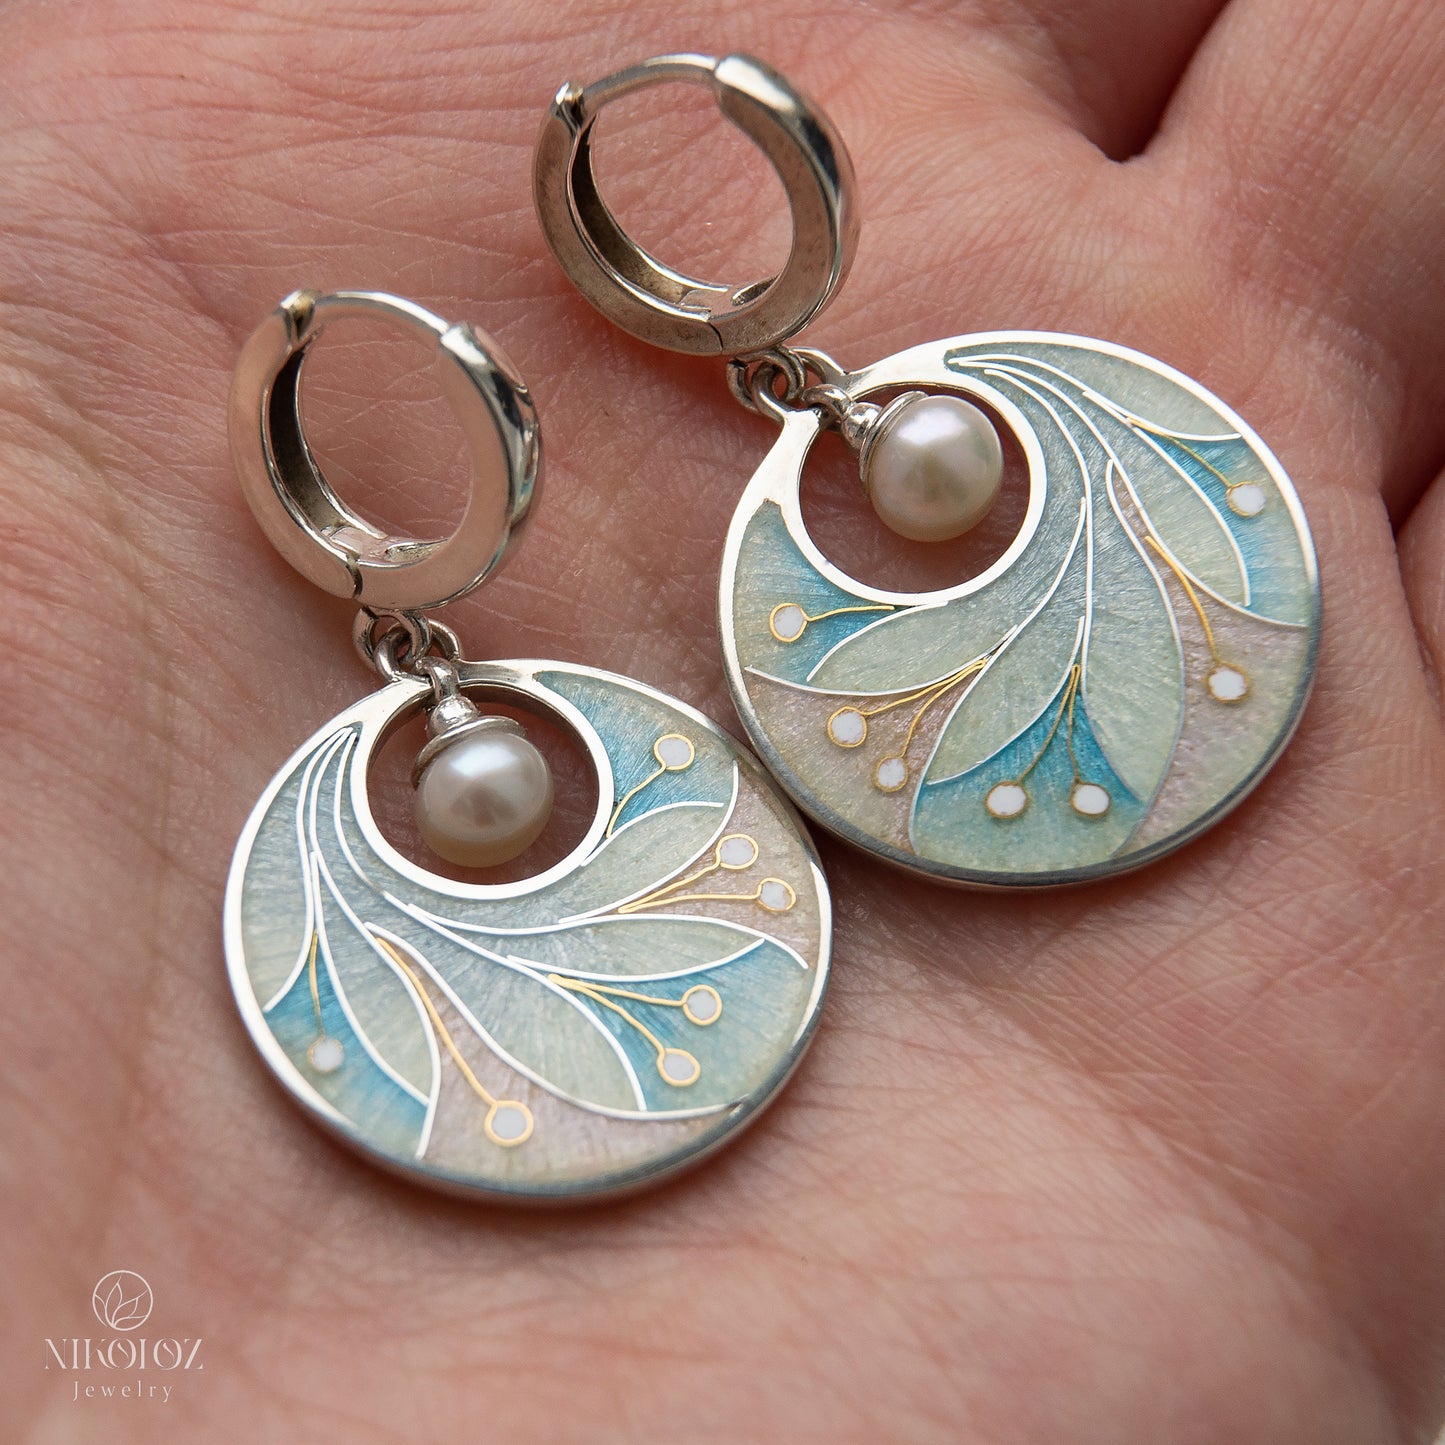 Pastel Colors Cloisonne Enamel Earrings With White freshwater Pearls